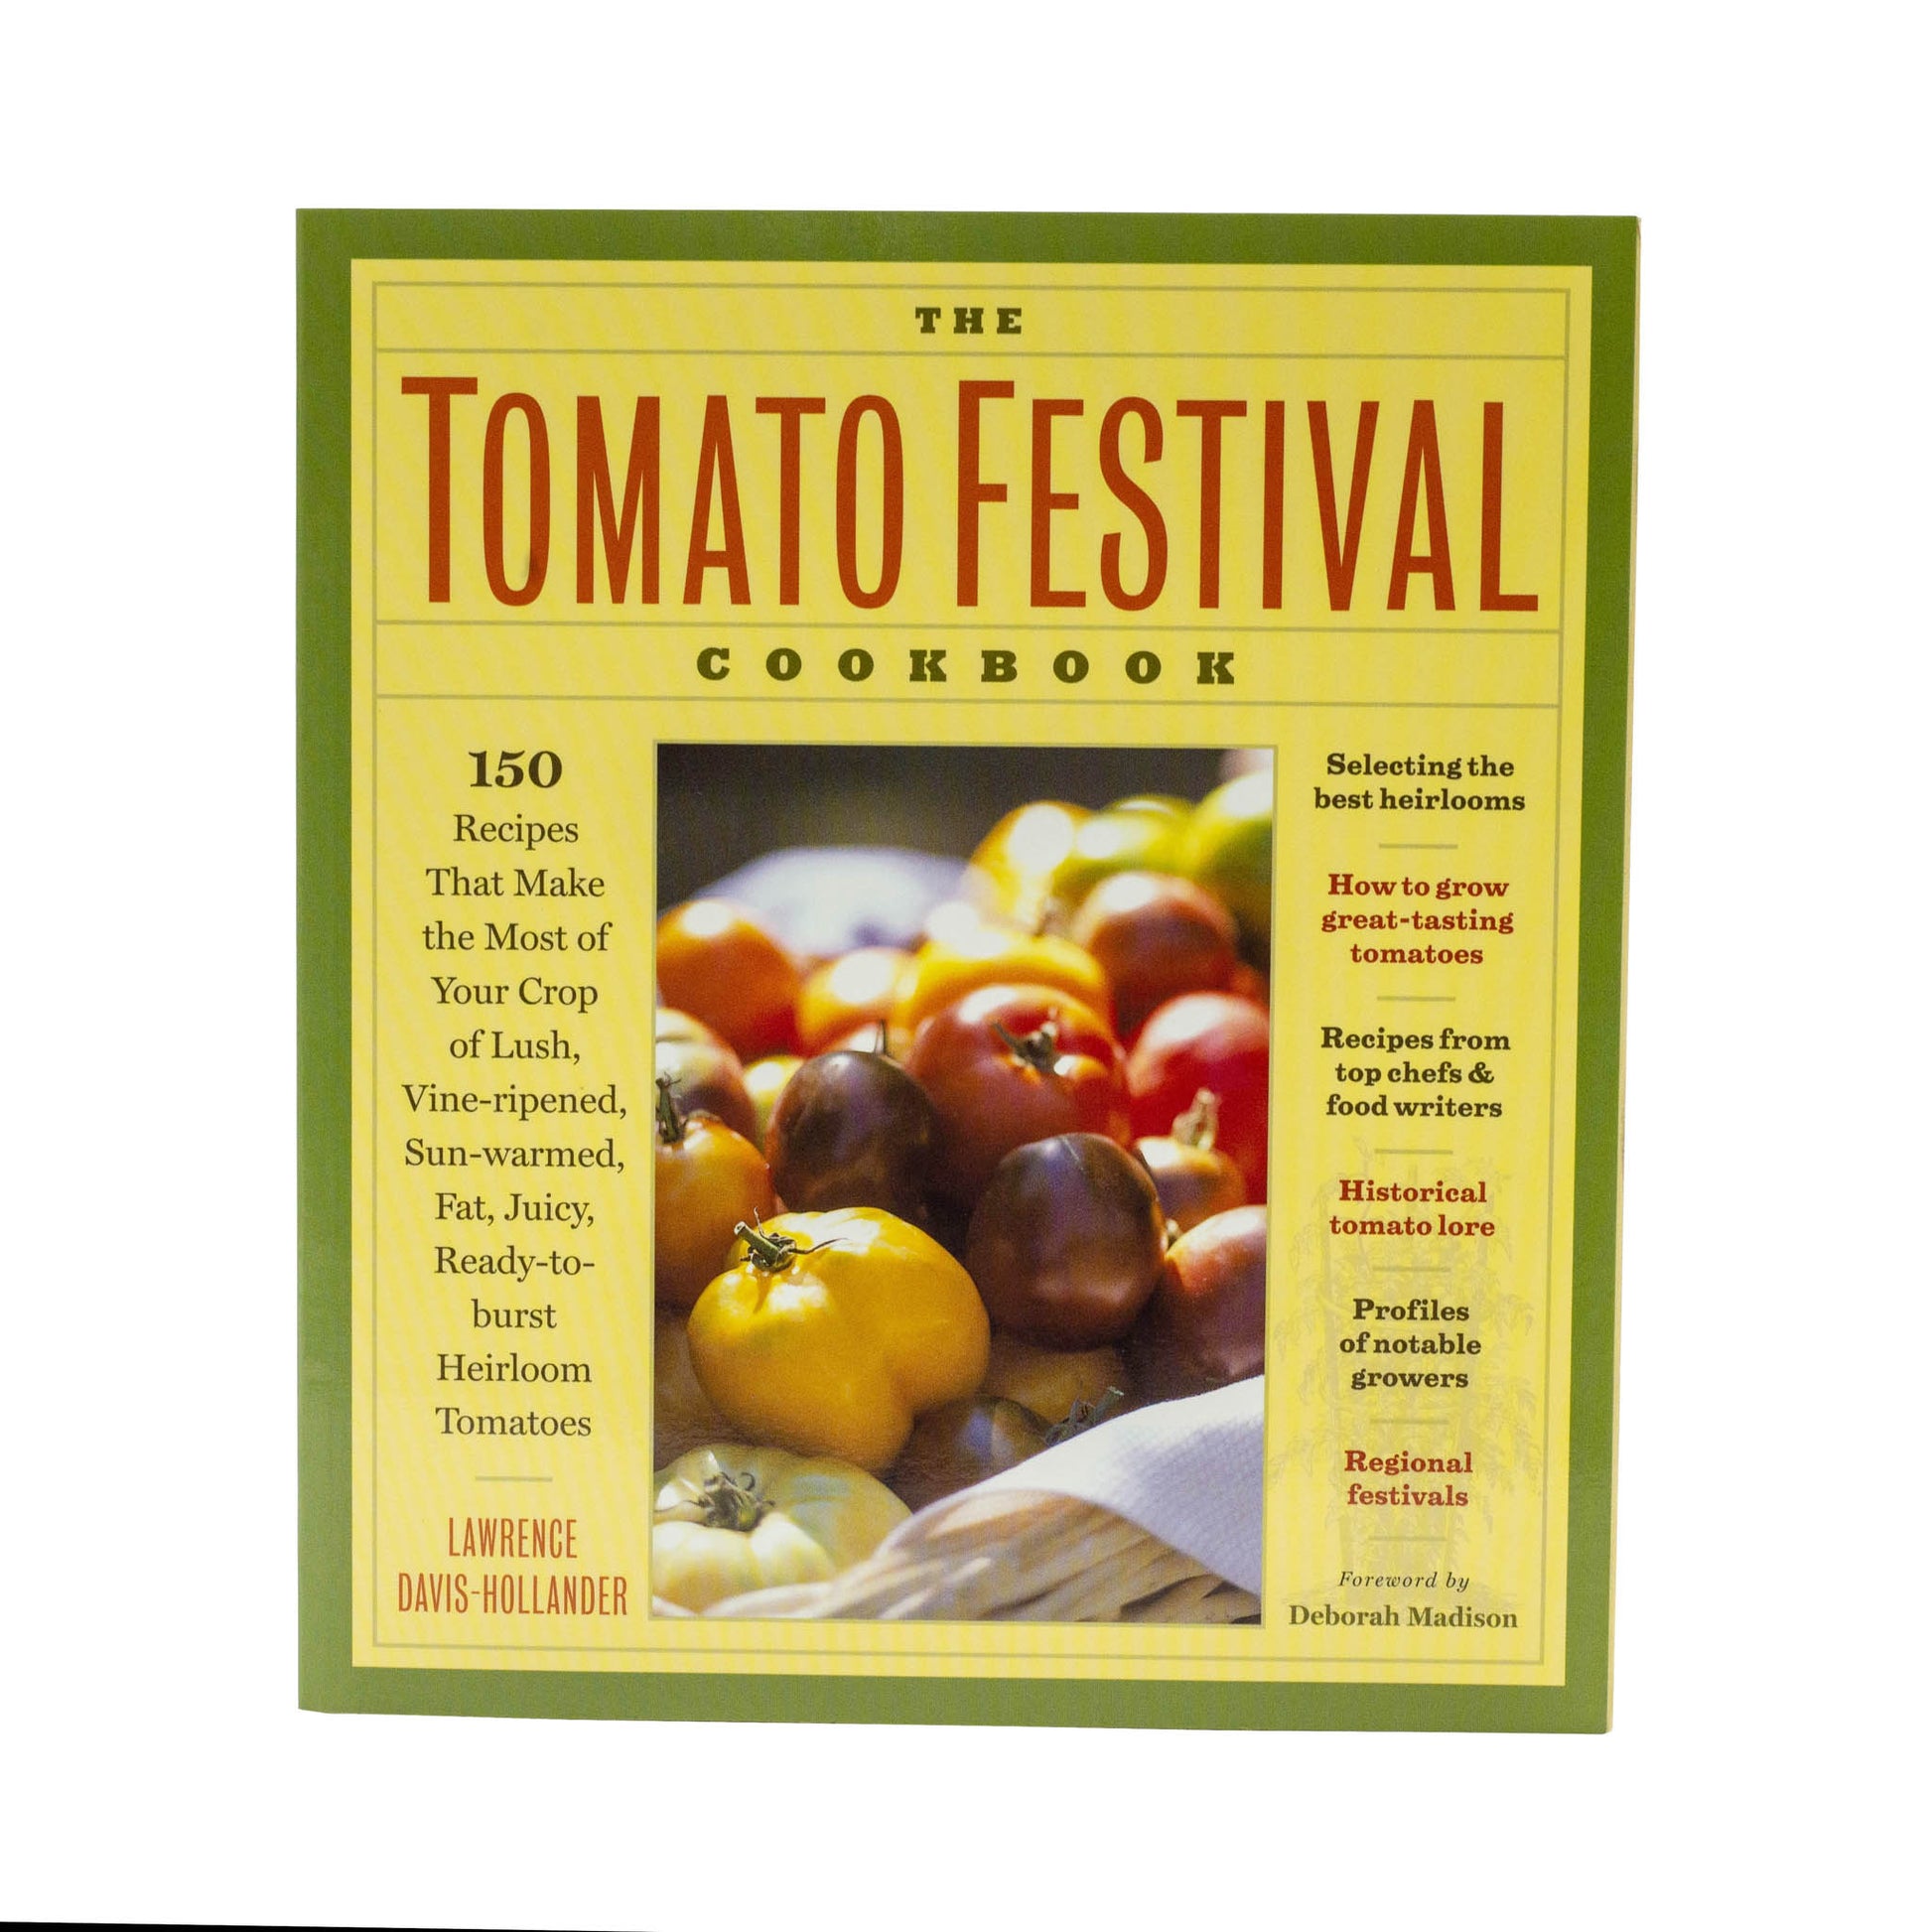 Tomato festival cook book with 150 recipes as well as how to grow tomatoes, historical lore, profiles on growers and how to select the best best heirlooms. written by Lawrence Davis-Hollander